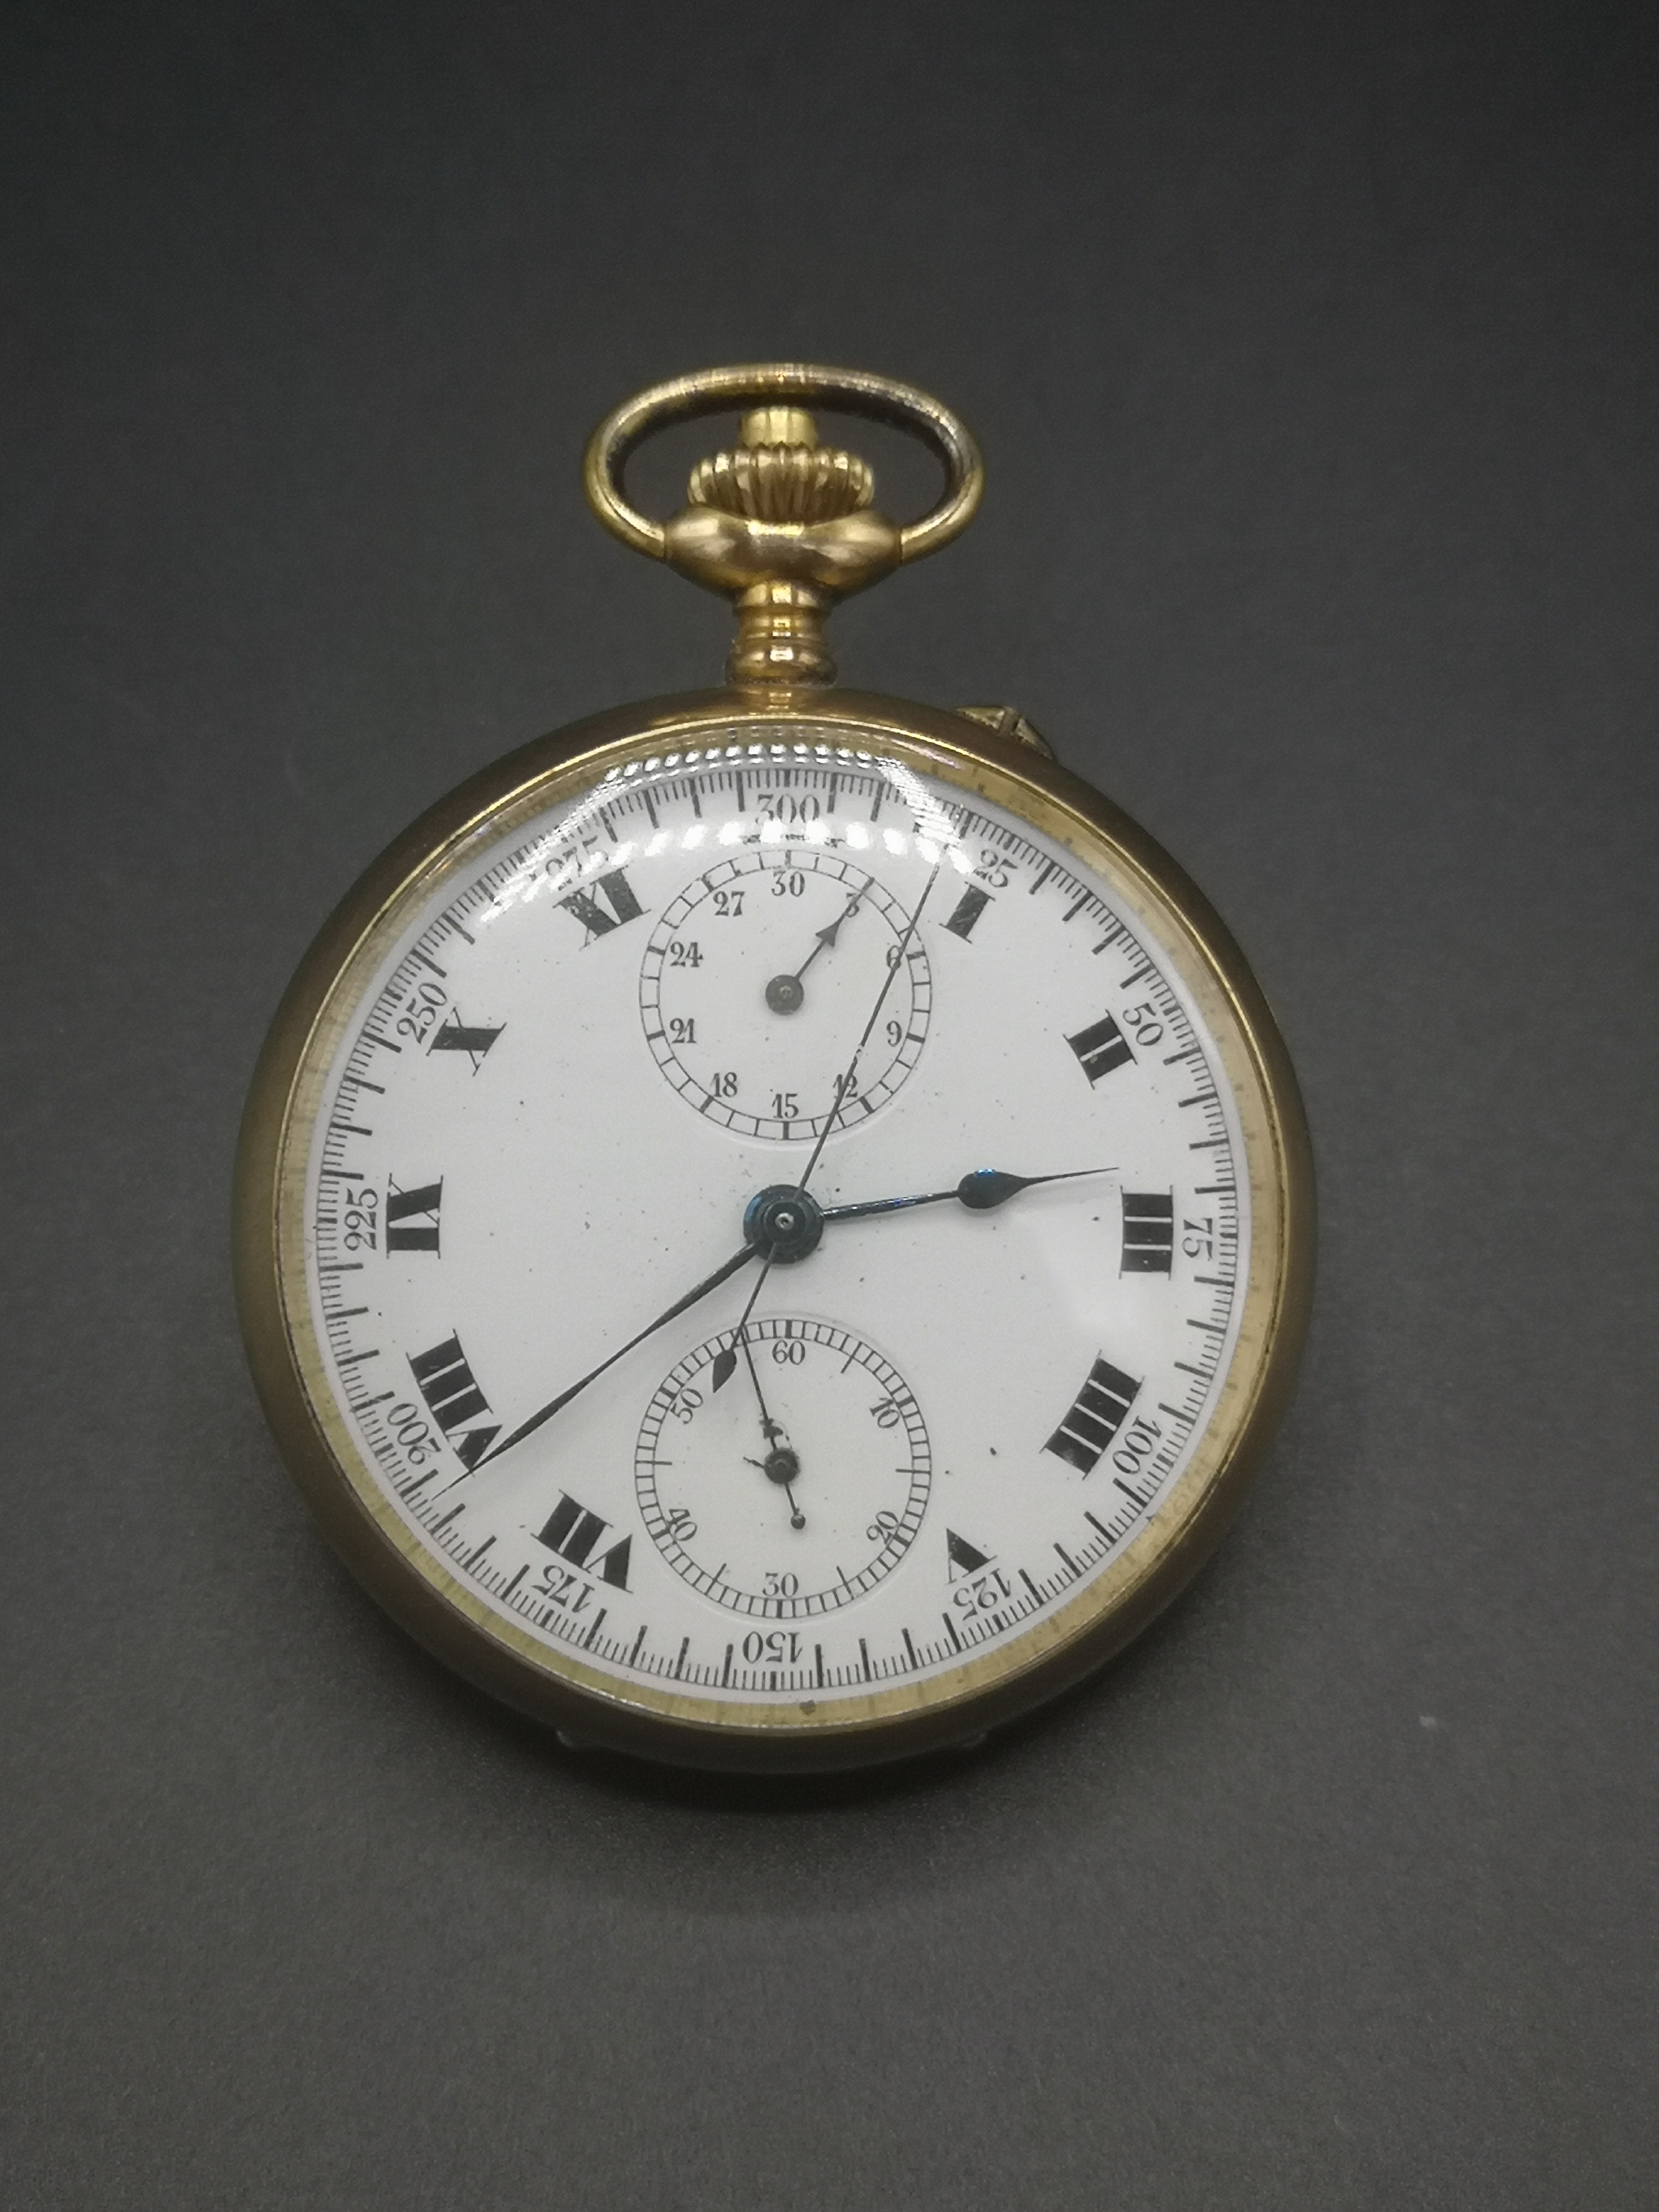 Rolled gold pocket watch